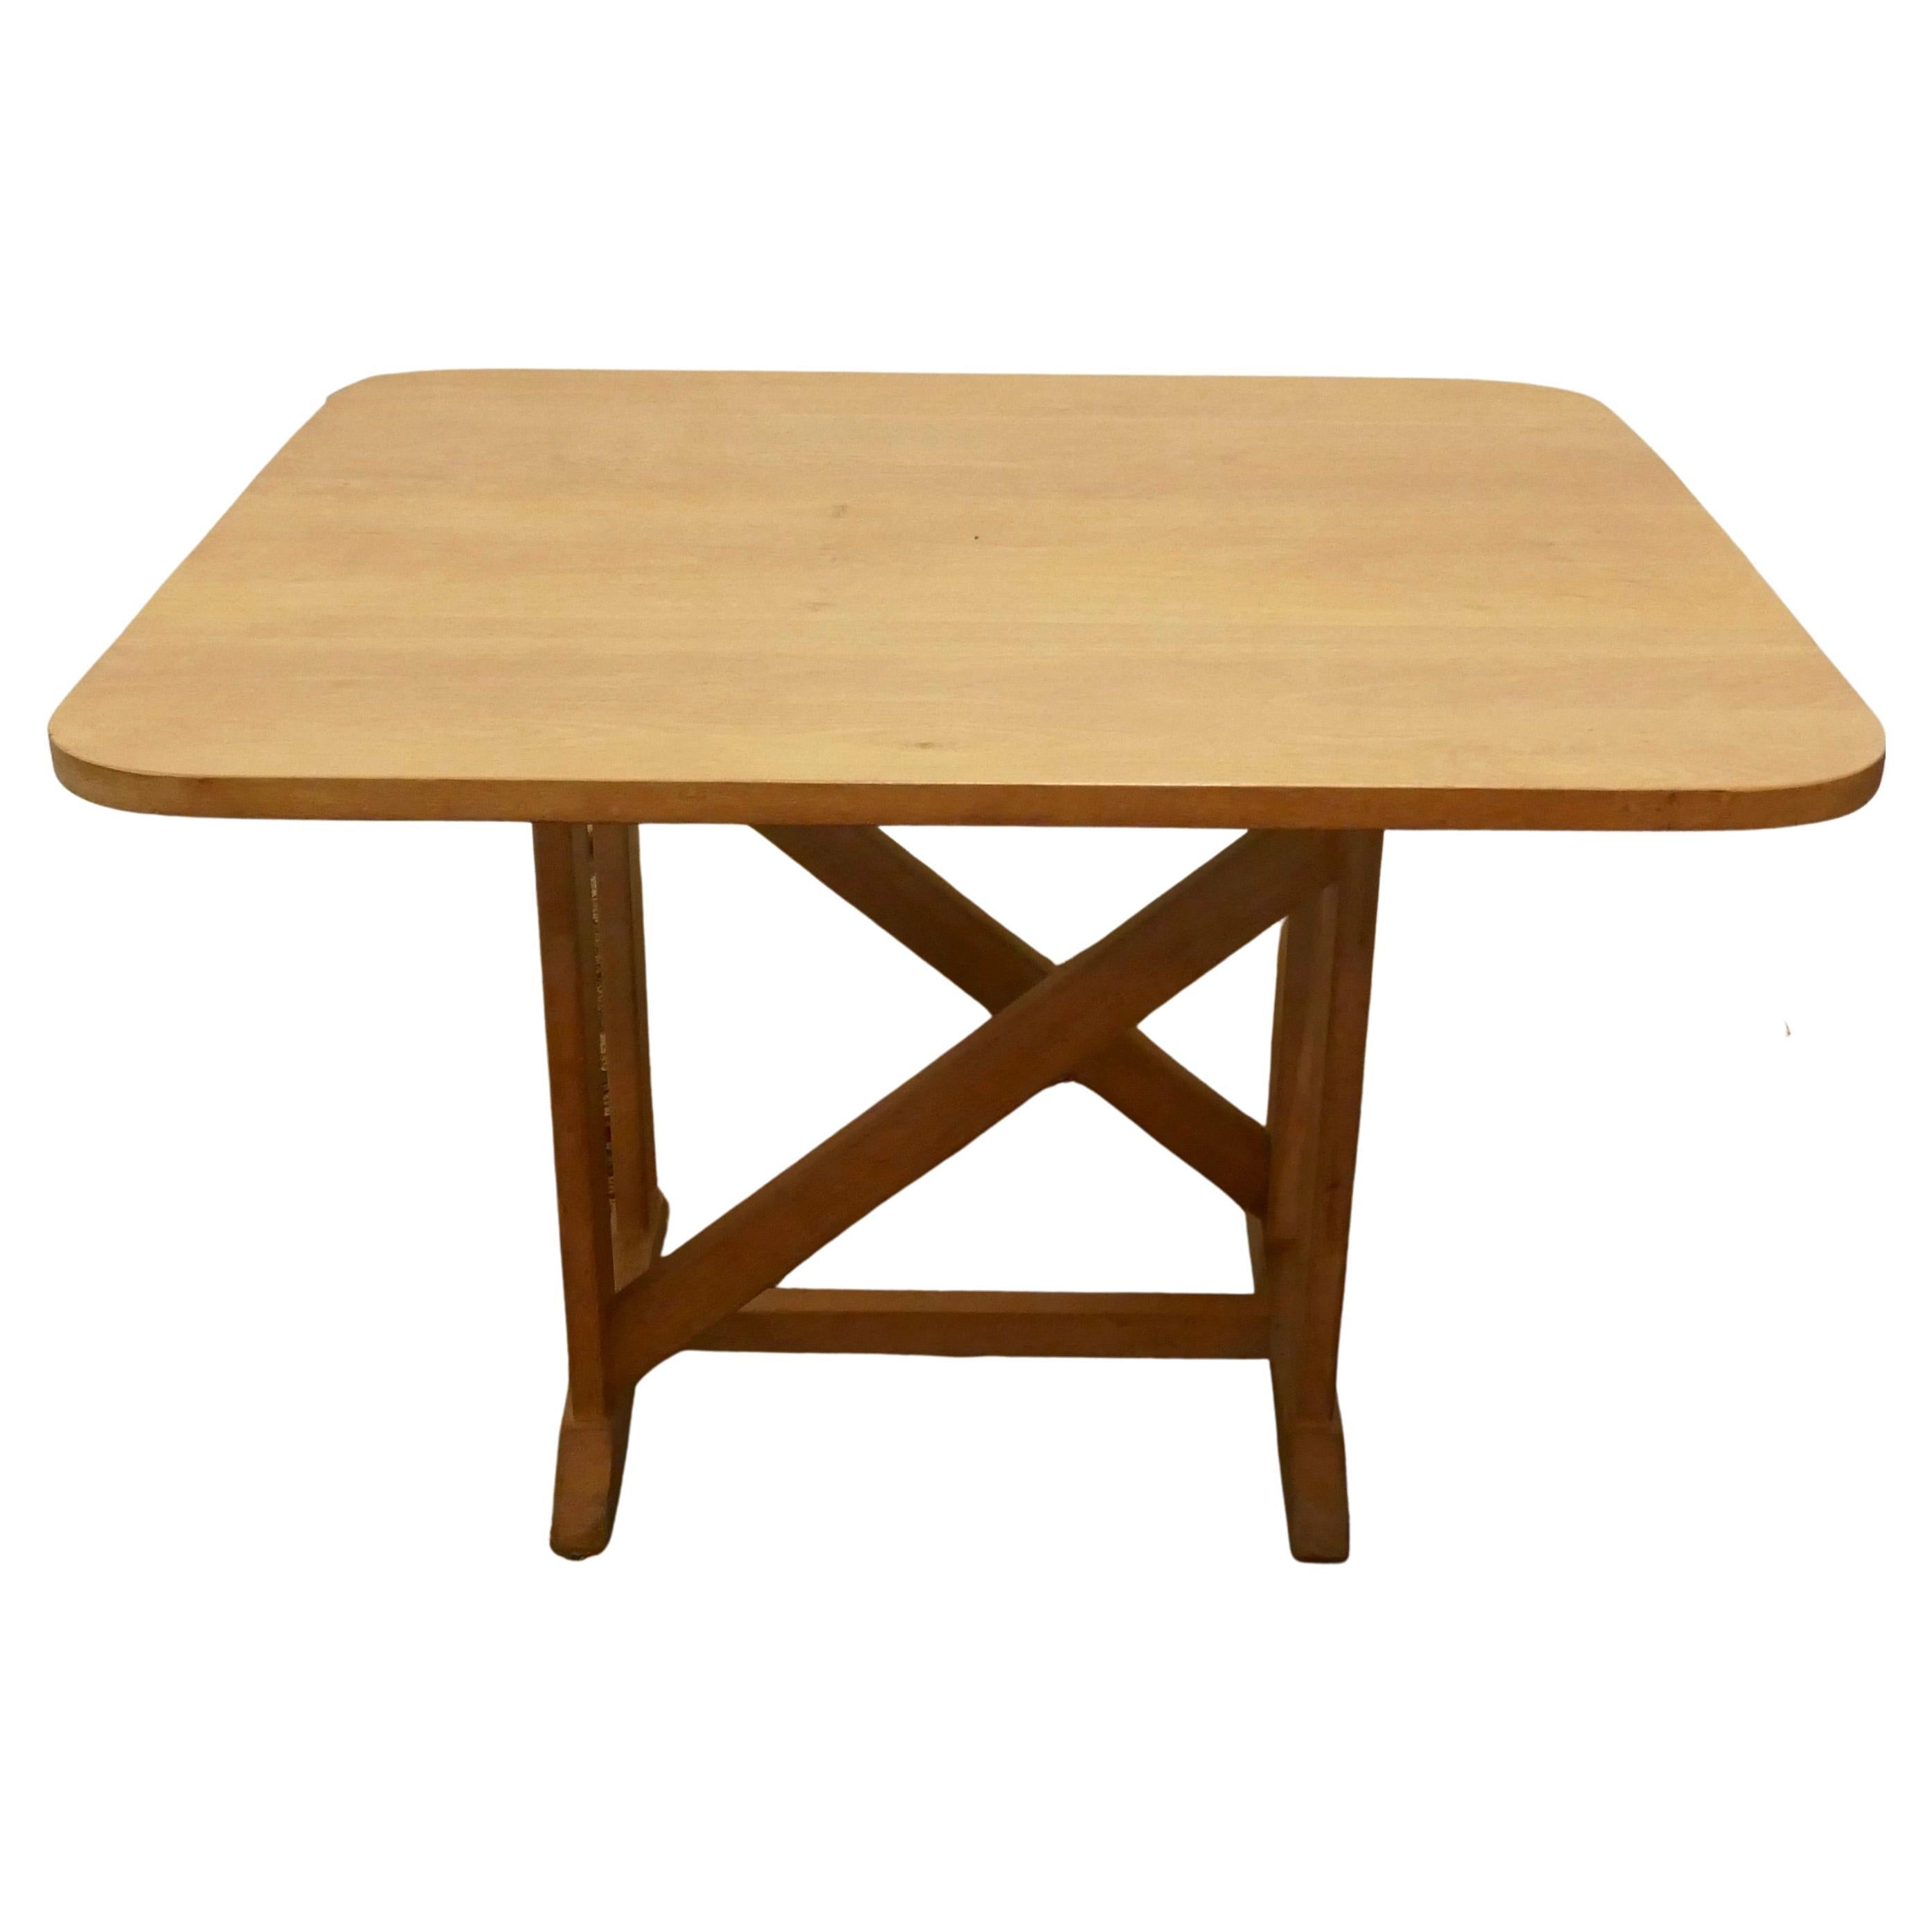 Golden Oak Arts and Crafts Dining Table